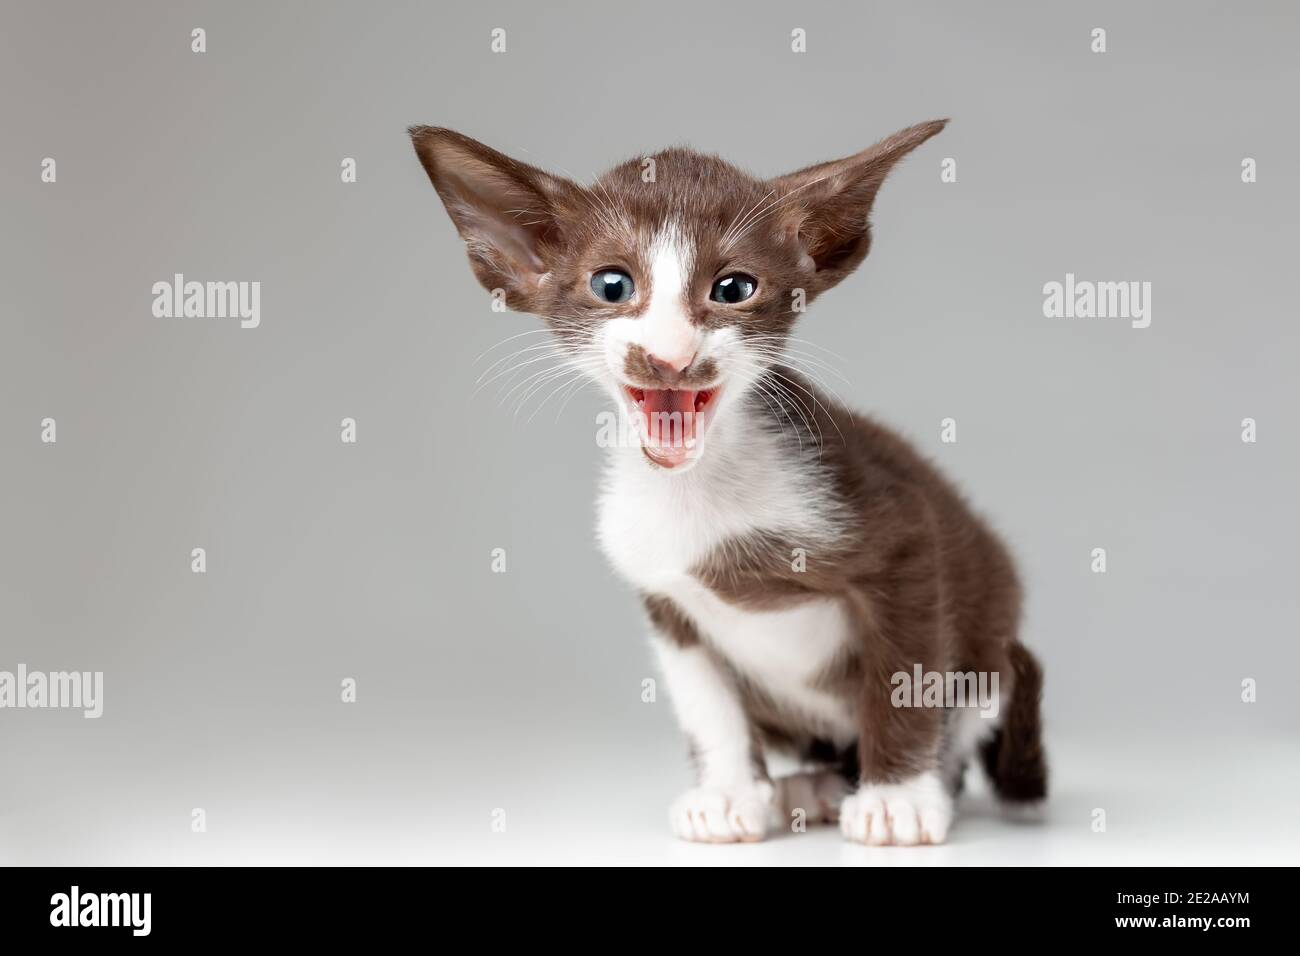 Little active kitten of oriental cat breed of white and brown bicolor with blue eyes is meowing against grey background Stock Photo